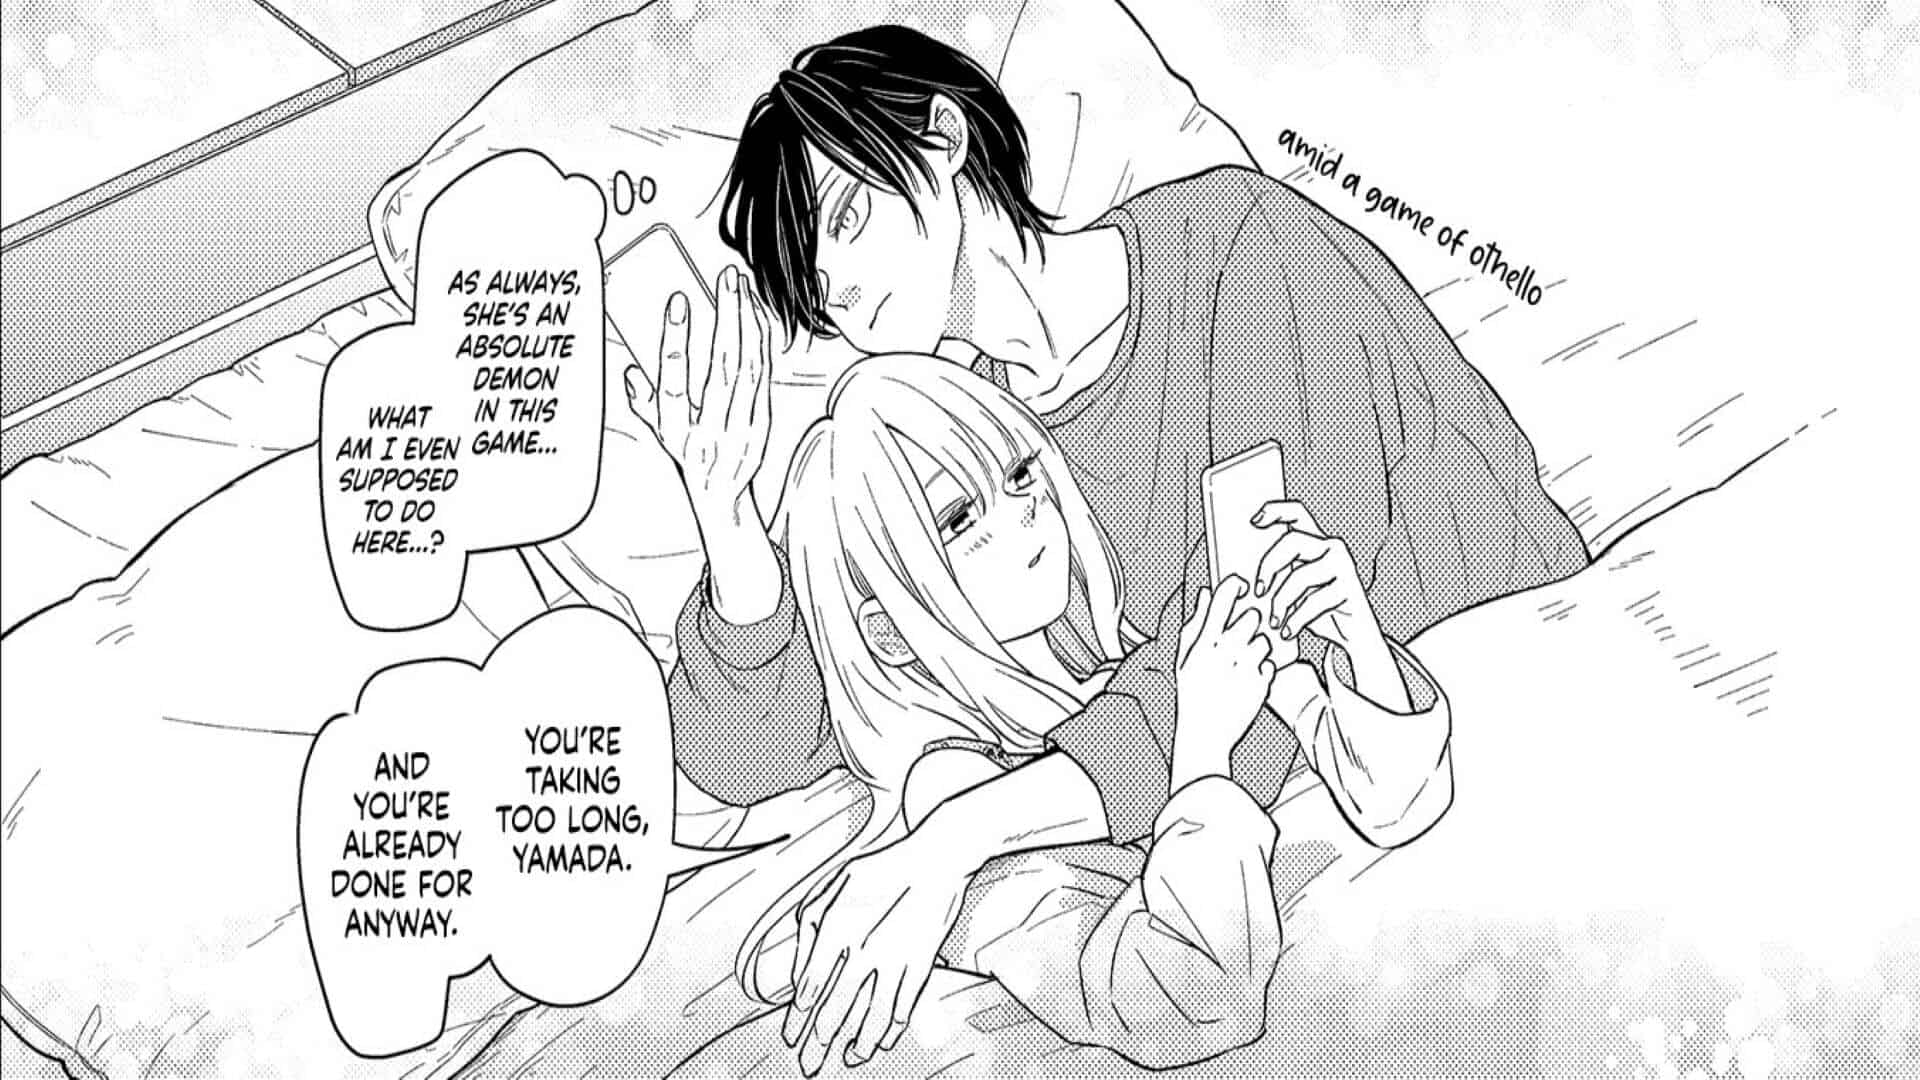 Yamada And Akane In Bed Playing Othello To Pass Time - My Lv999 Love For Yamada-Kun Chapter 94